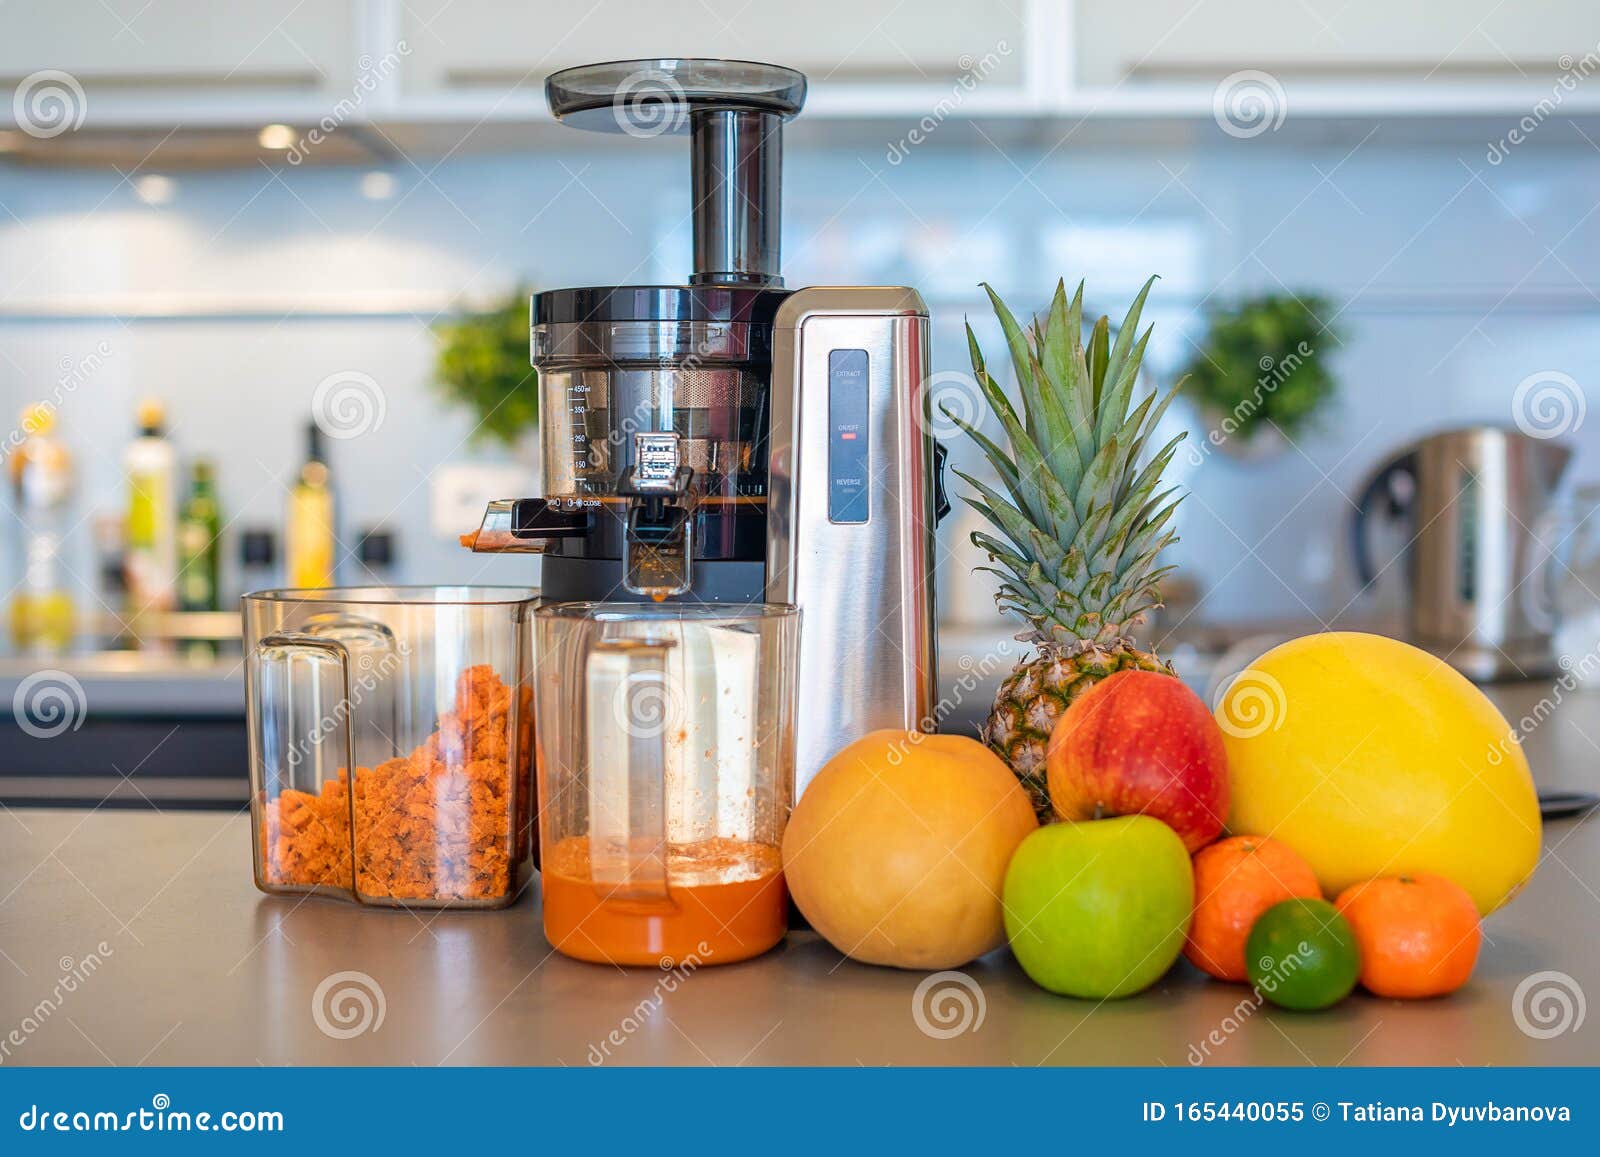 Making Fruit Juice with Juicer Machine in Home Kitchen, Healthy Eating Lifestyle Concept Stock Image - Image of girl, drink: 165440055